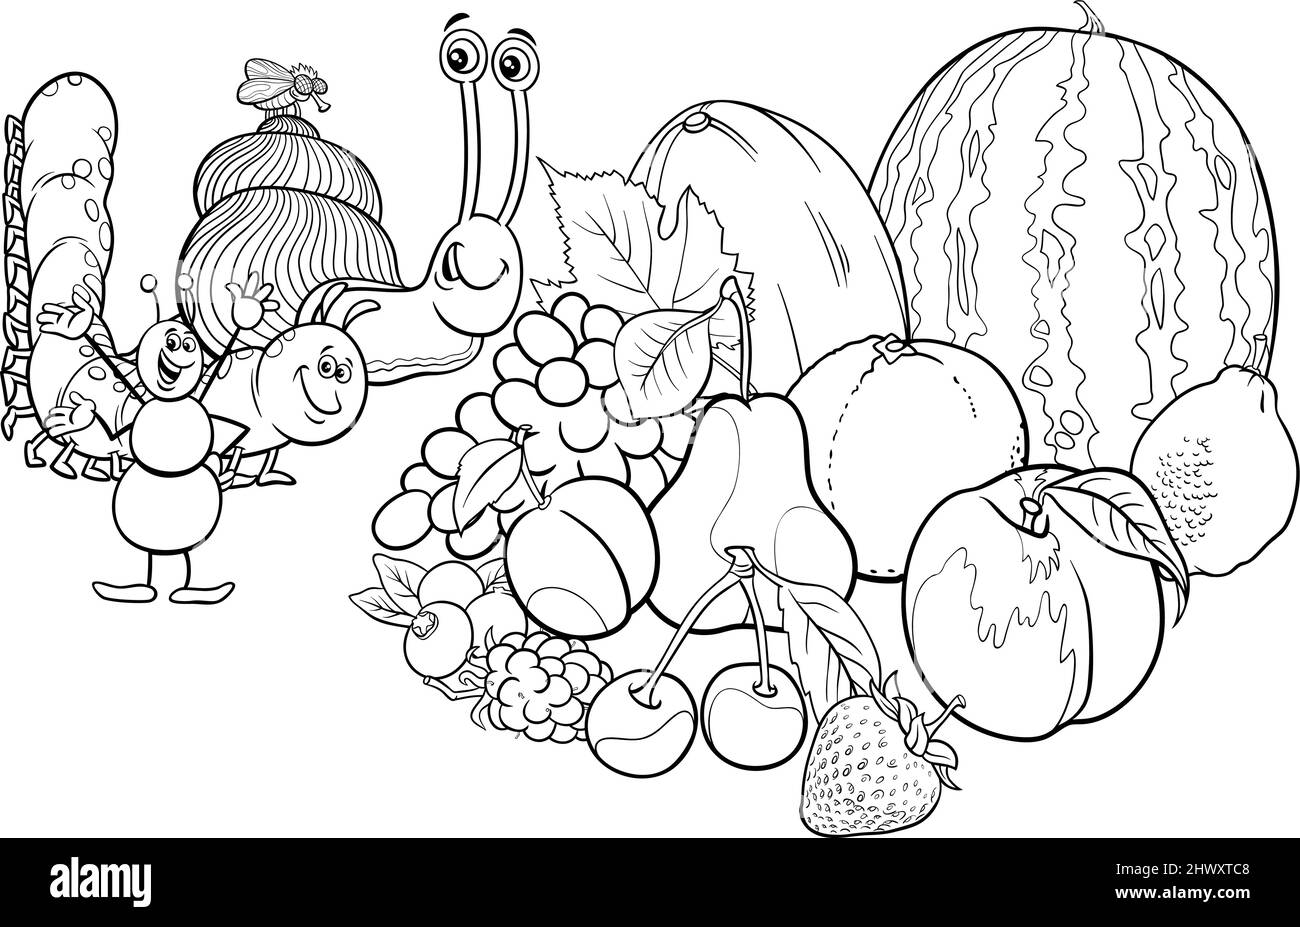 Black and white cartoon illustration of funny insects characters and snail with fresh fruit coloring book page Stock Vector